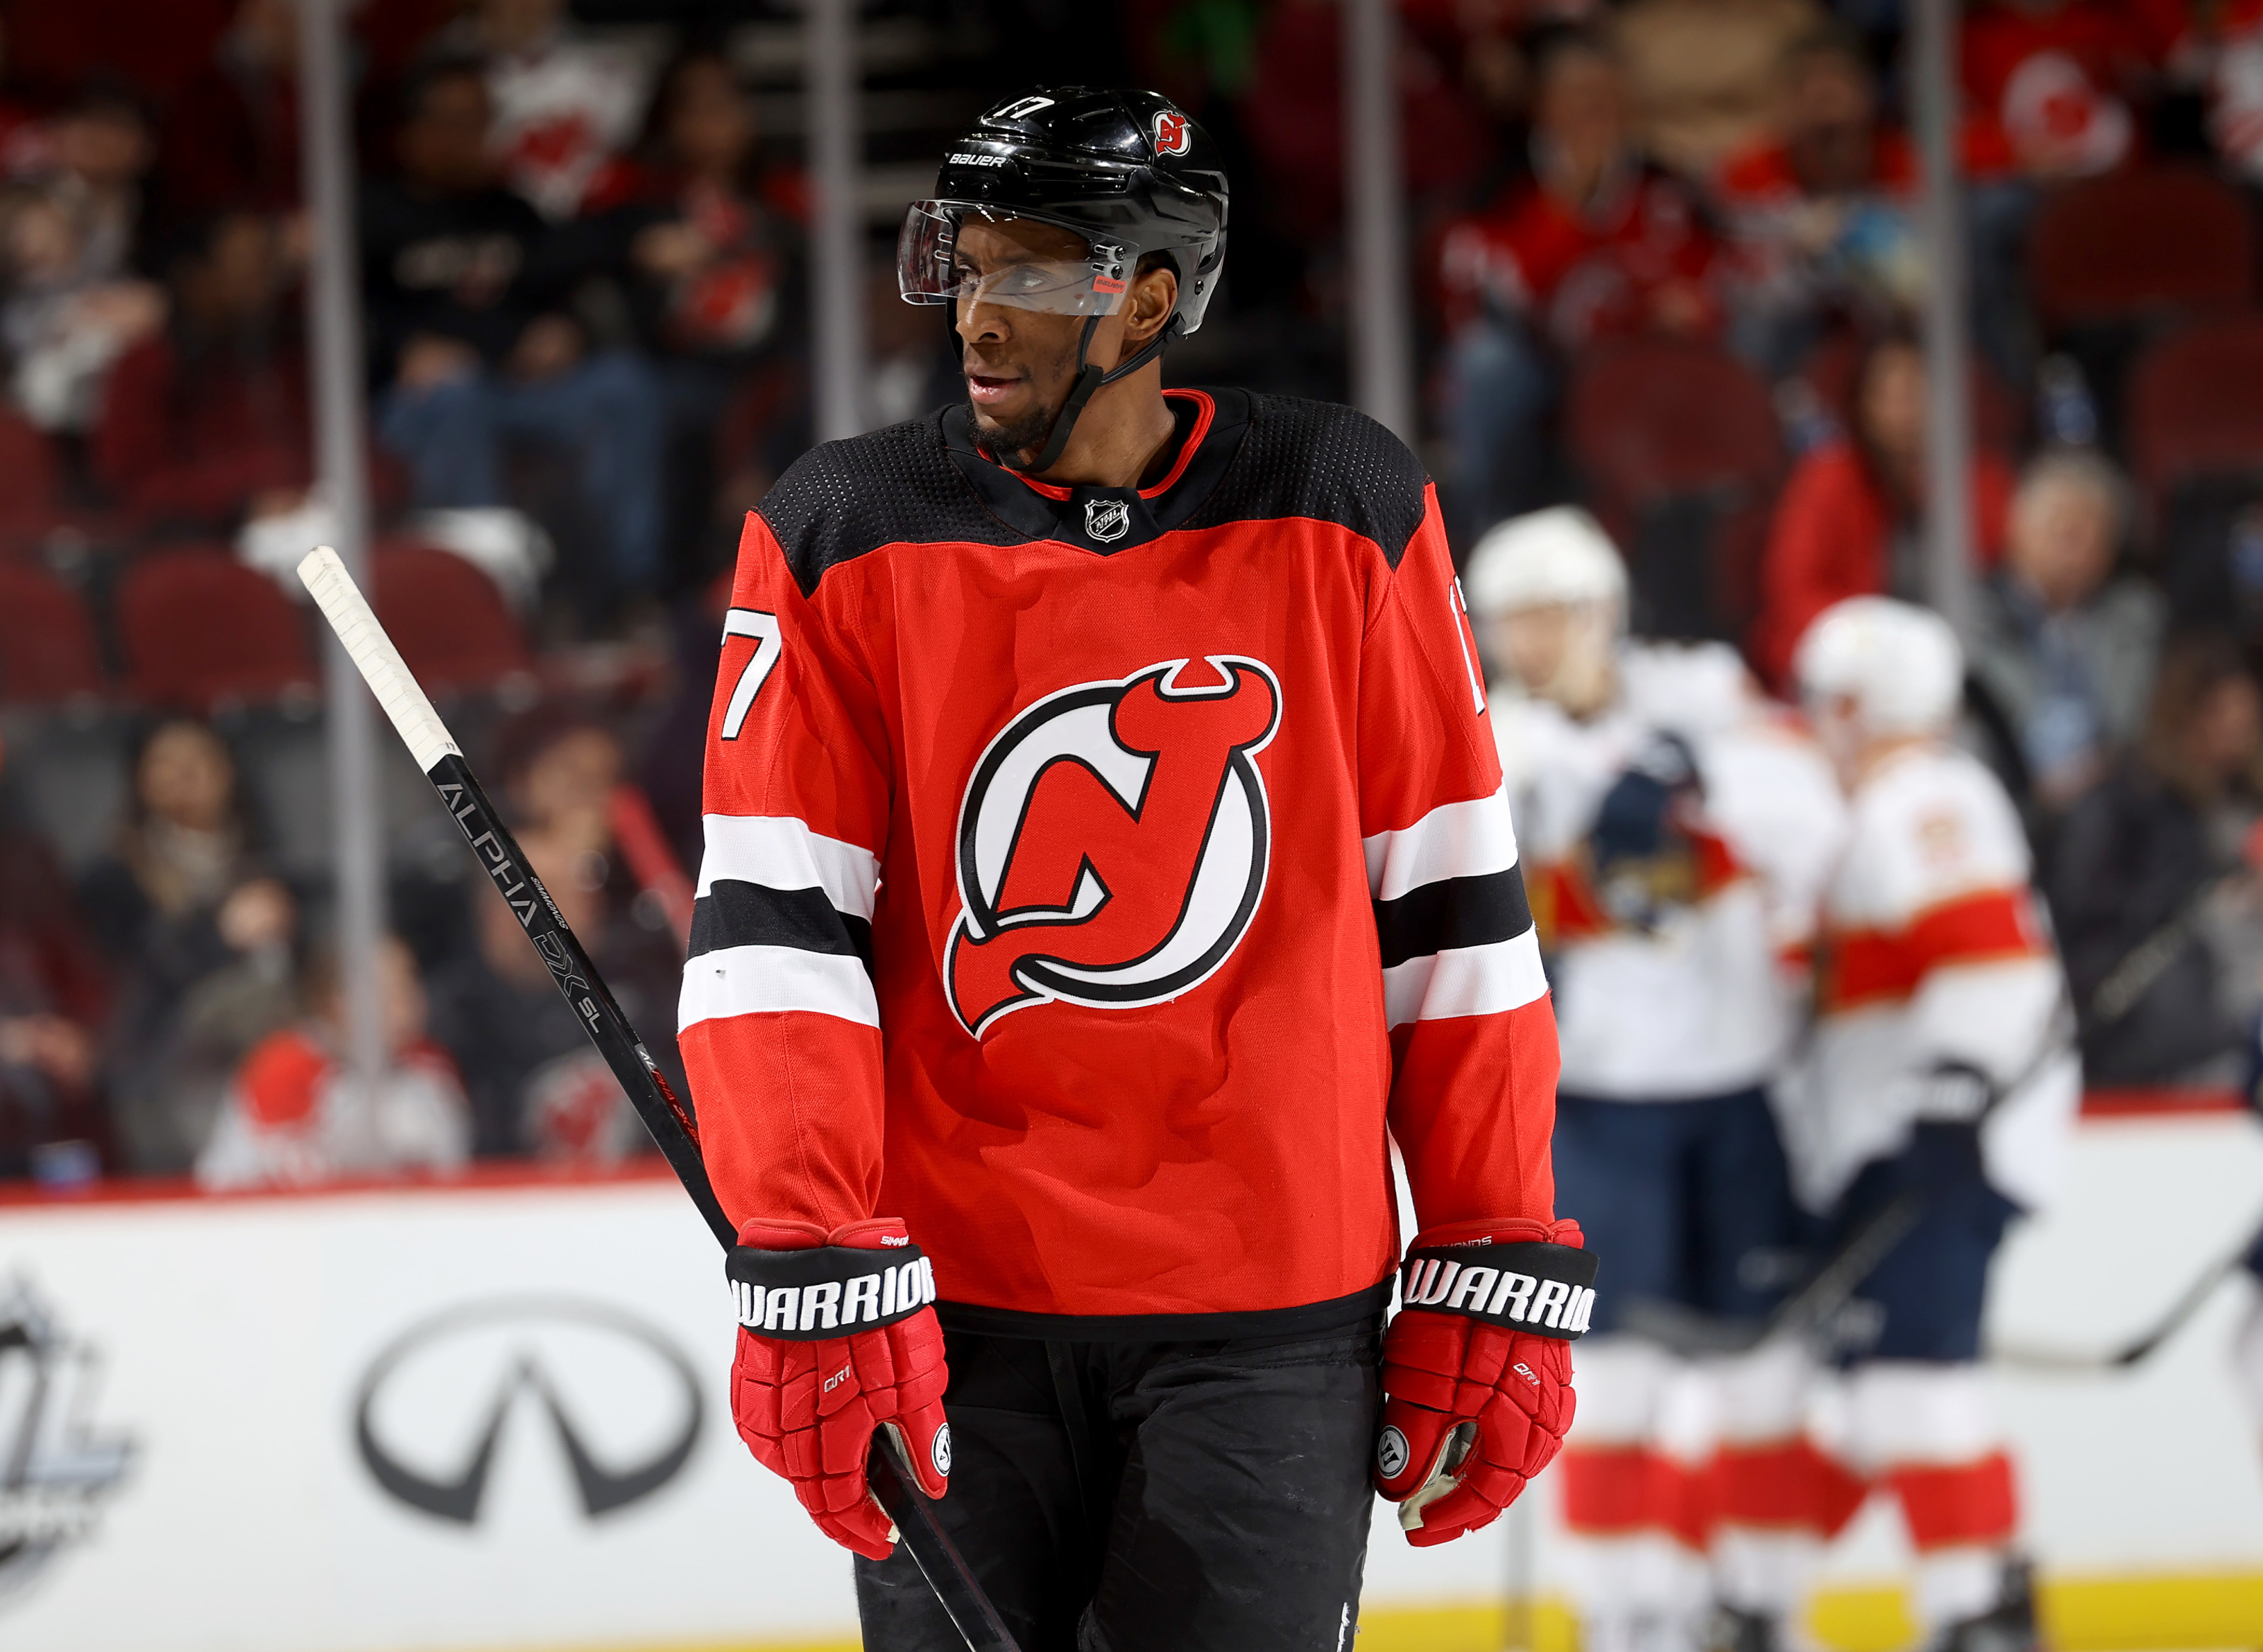 Canucks interested in trading for New Jersey Devils' Wayne Simmonds